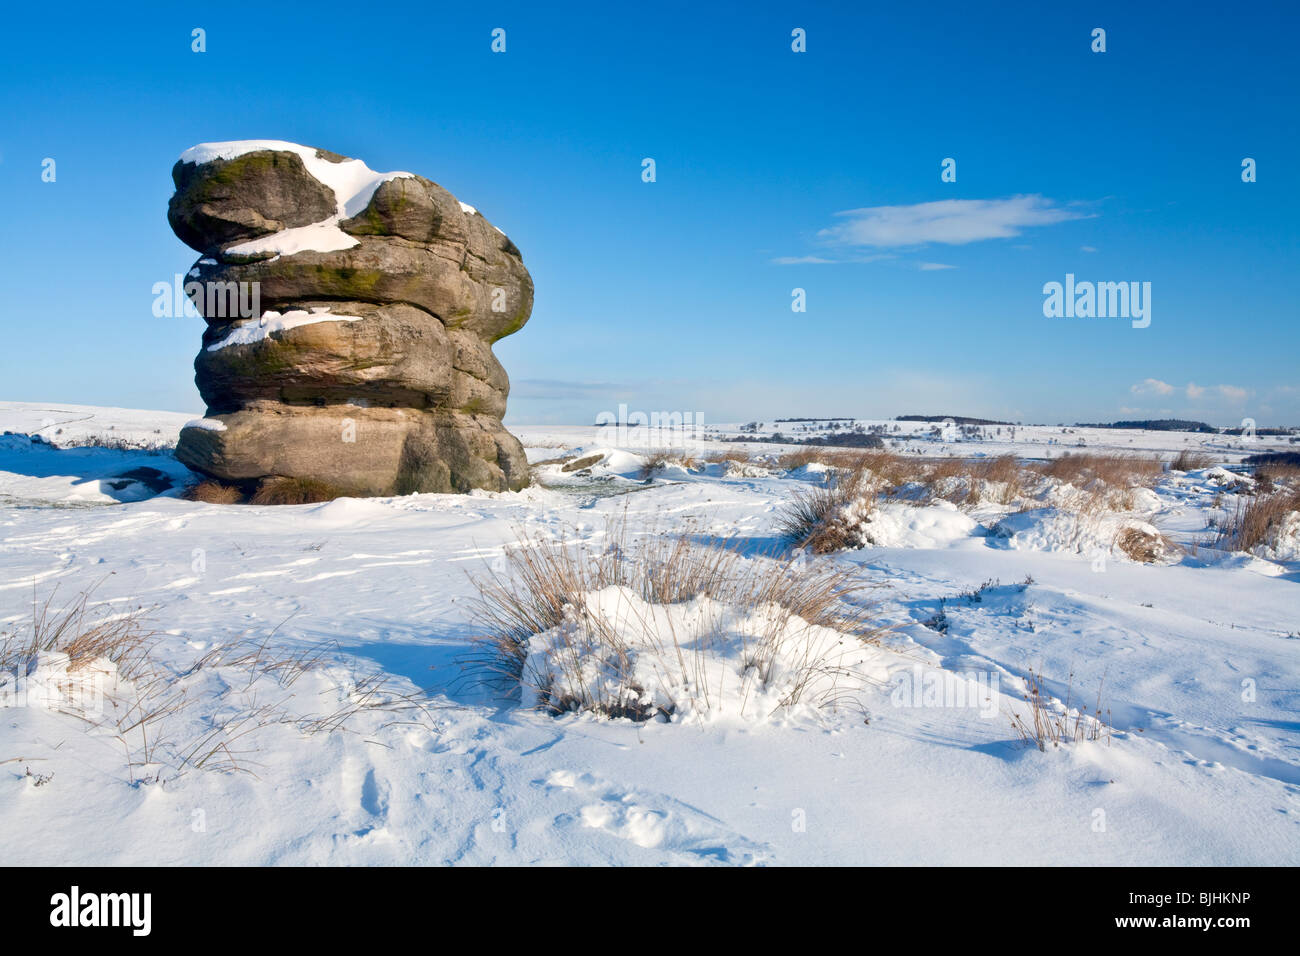 The Eagle Stone on Baslow Edge following heavy winter snowfall in the Peak District National Park Stock Photo